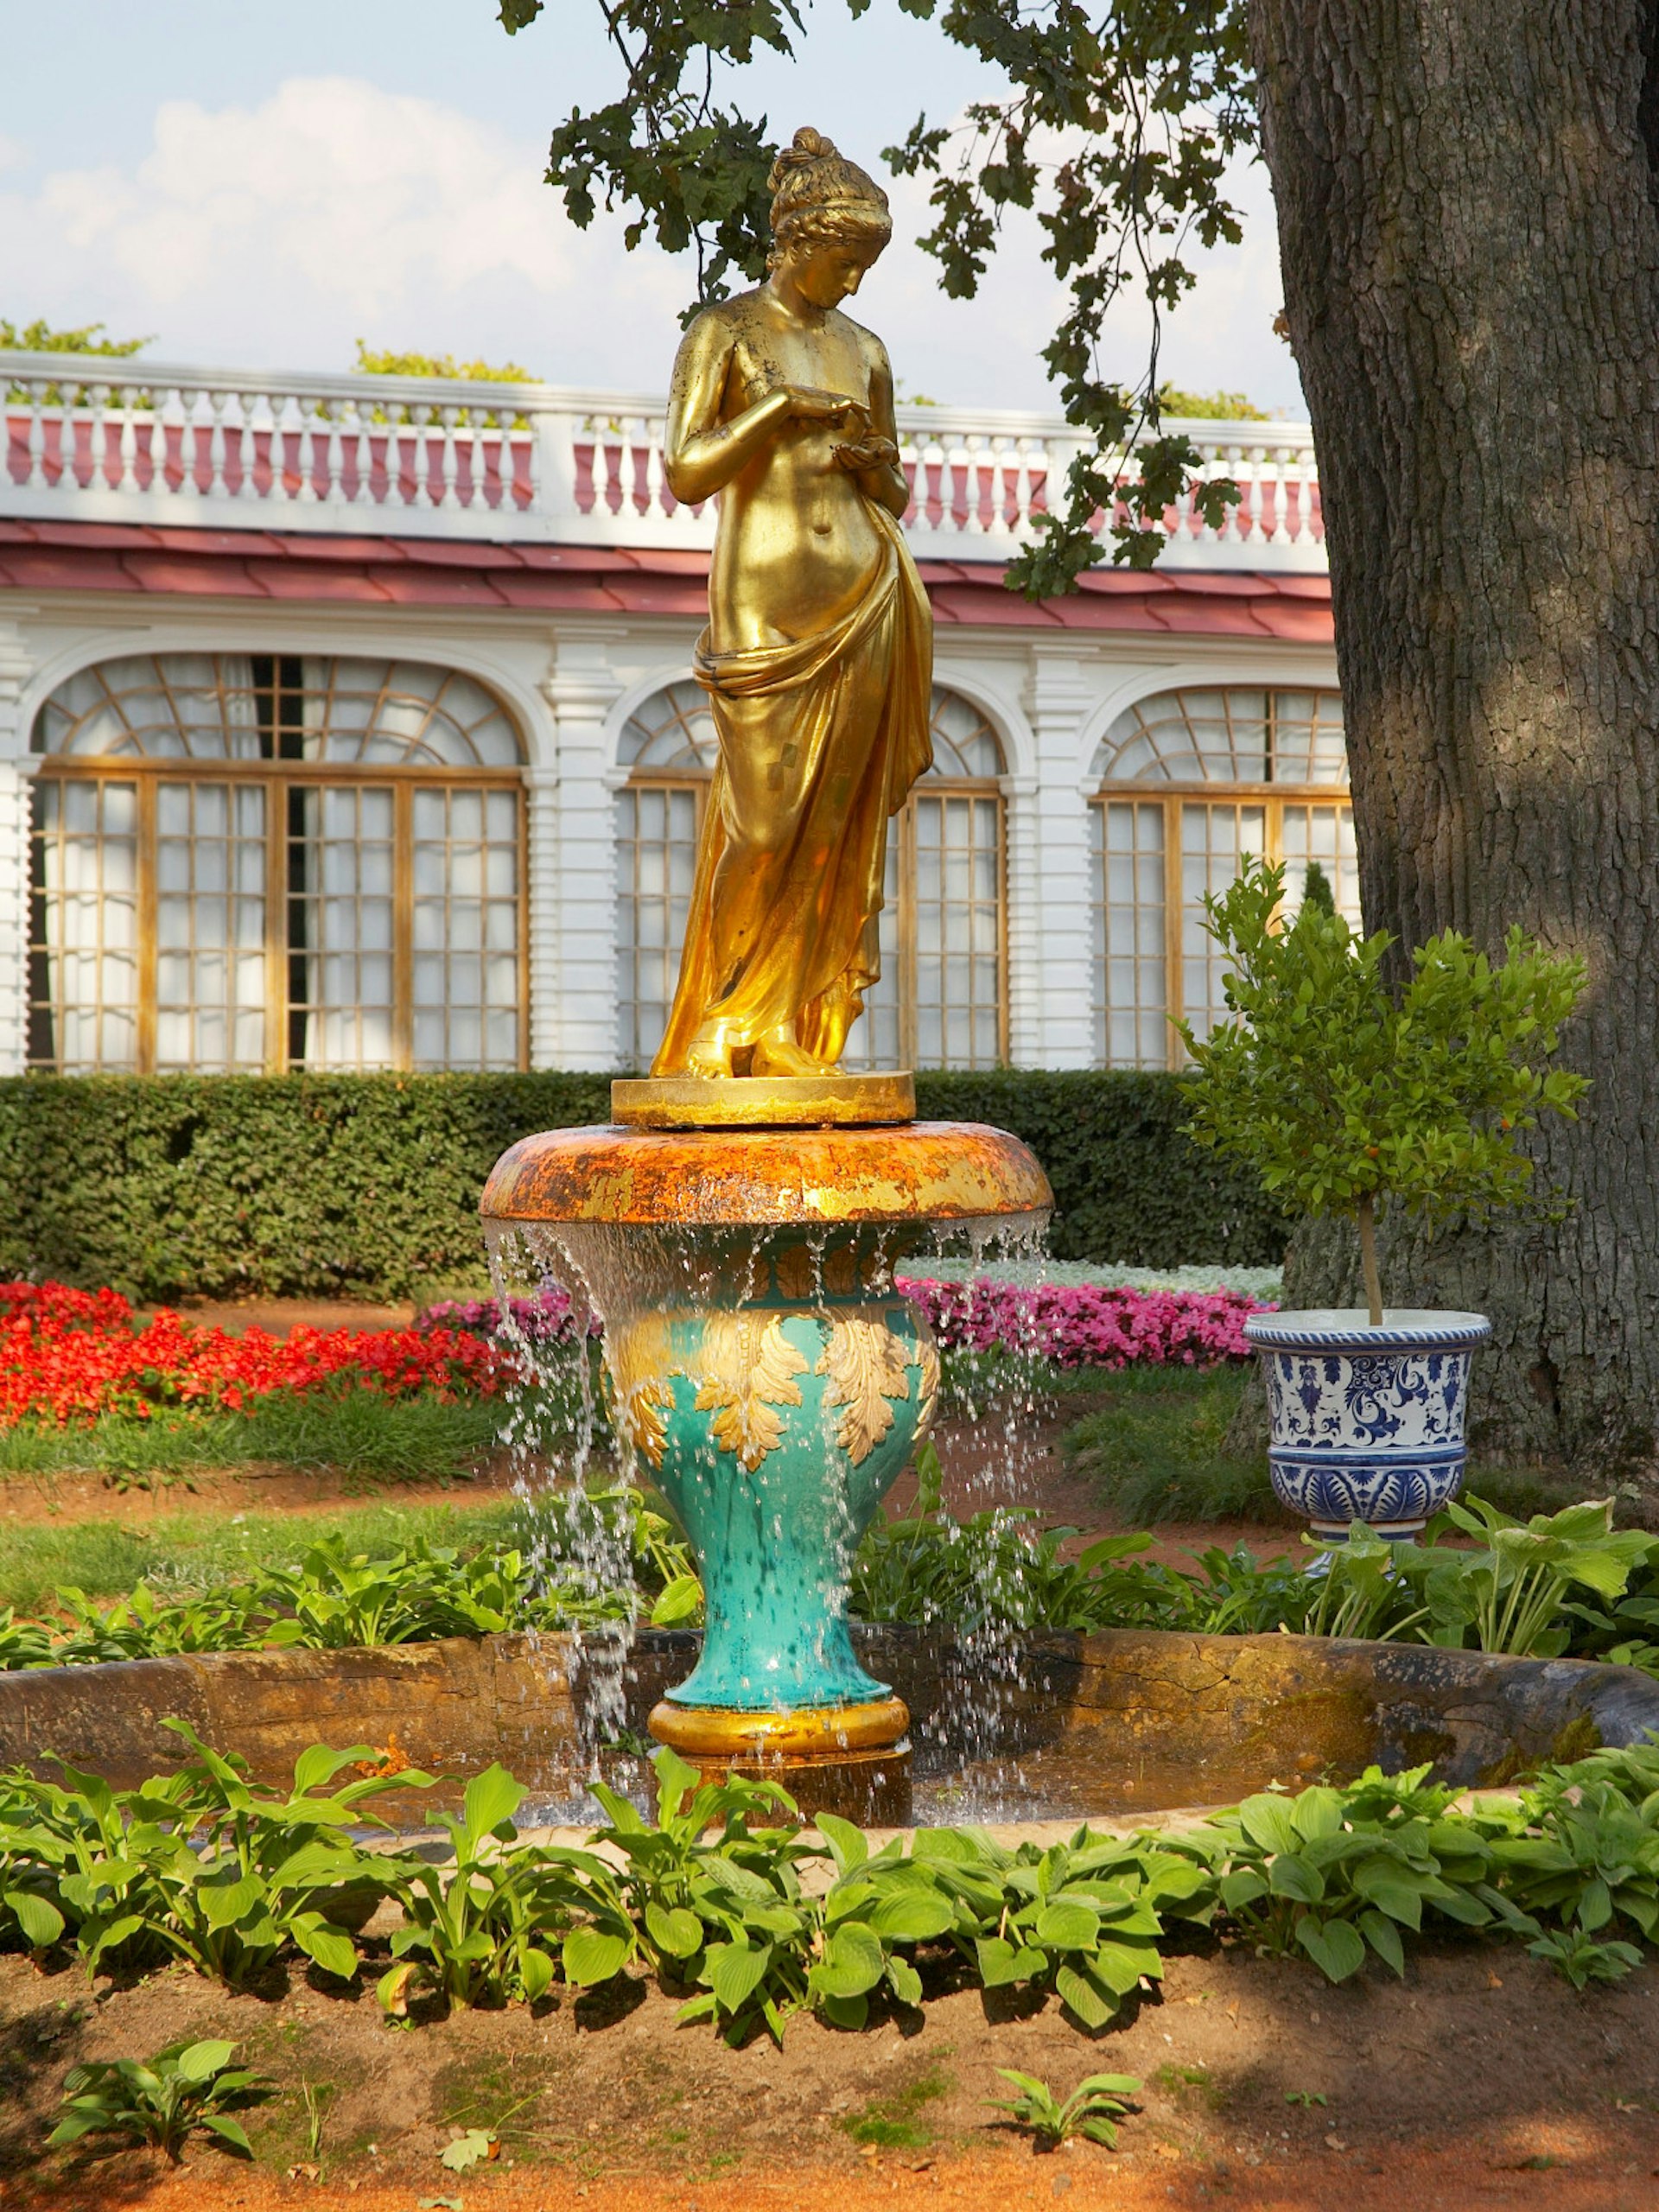 The Cloche Fountain in Peterhof's Monplaisir Garden, part of Peter the Great's palace complex © Svetlana K / Getty Images